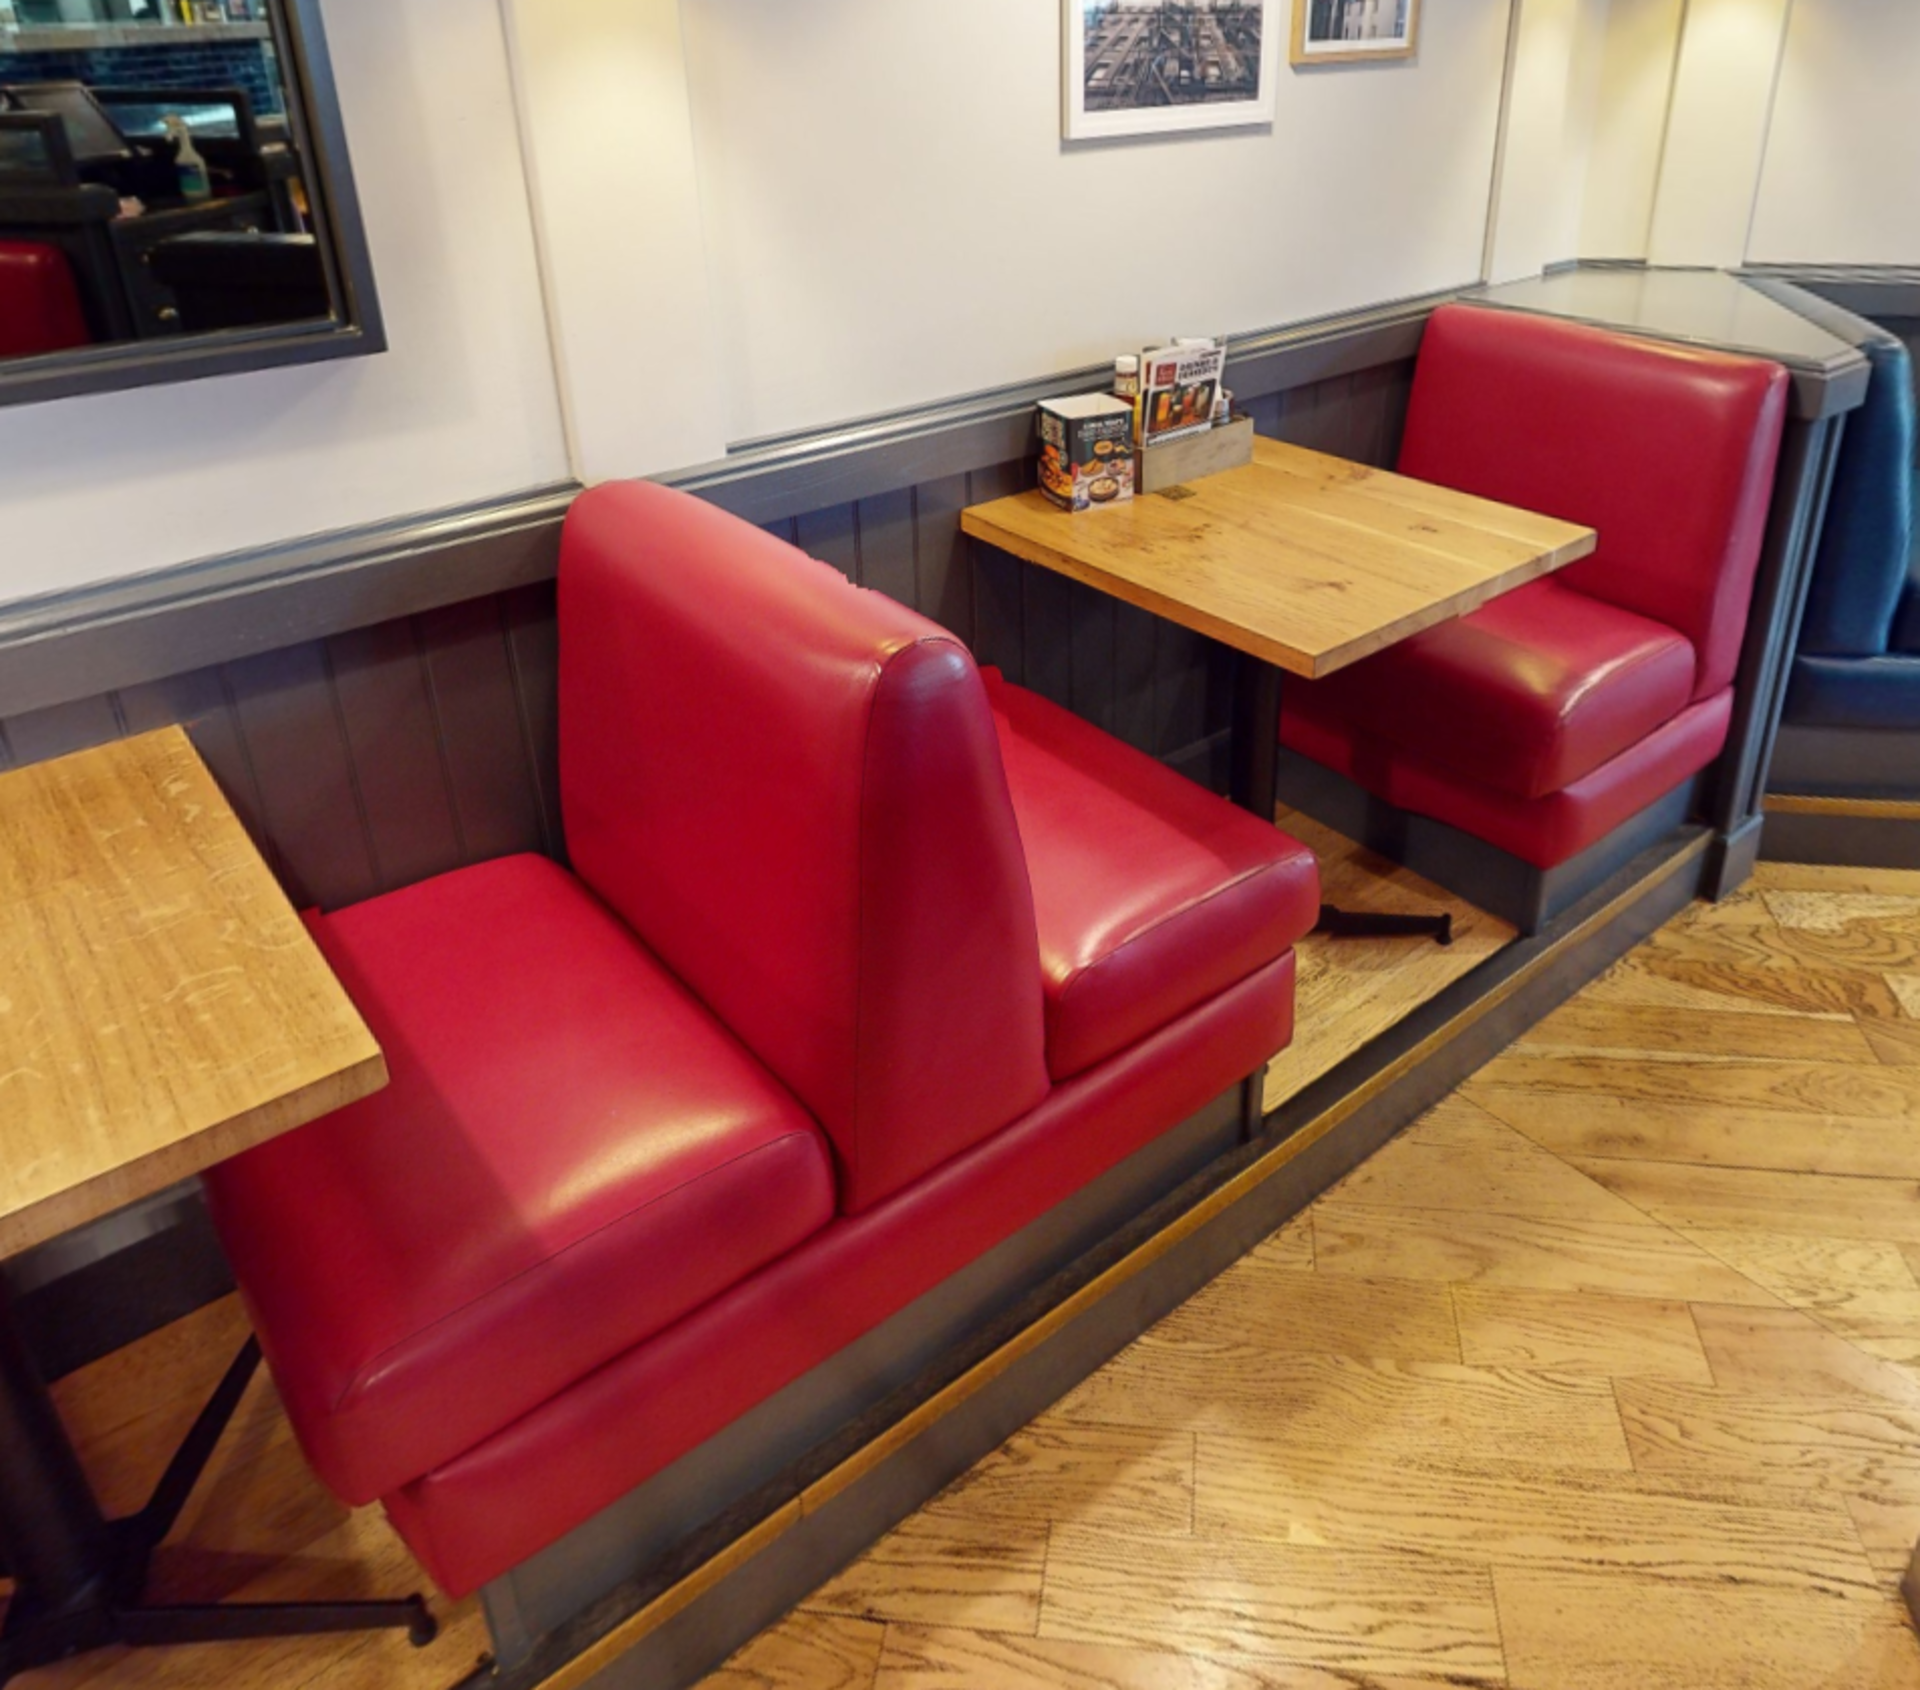 1 x Collection of Restaurant Seating Benches - Single Seat Benches in Red Faux Leather - Bild 4 aus 5